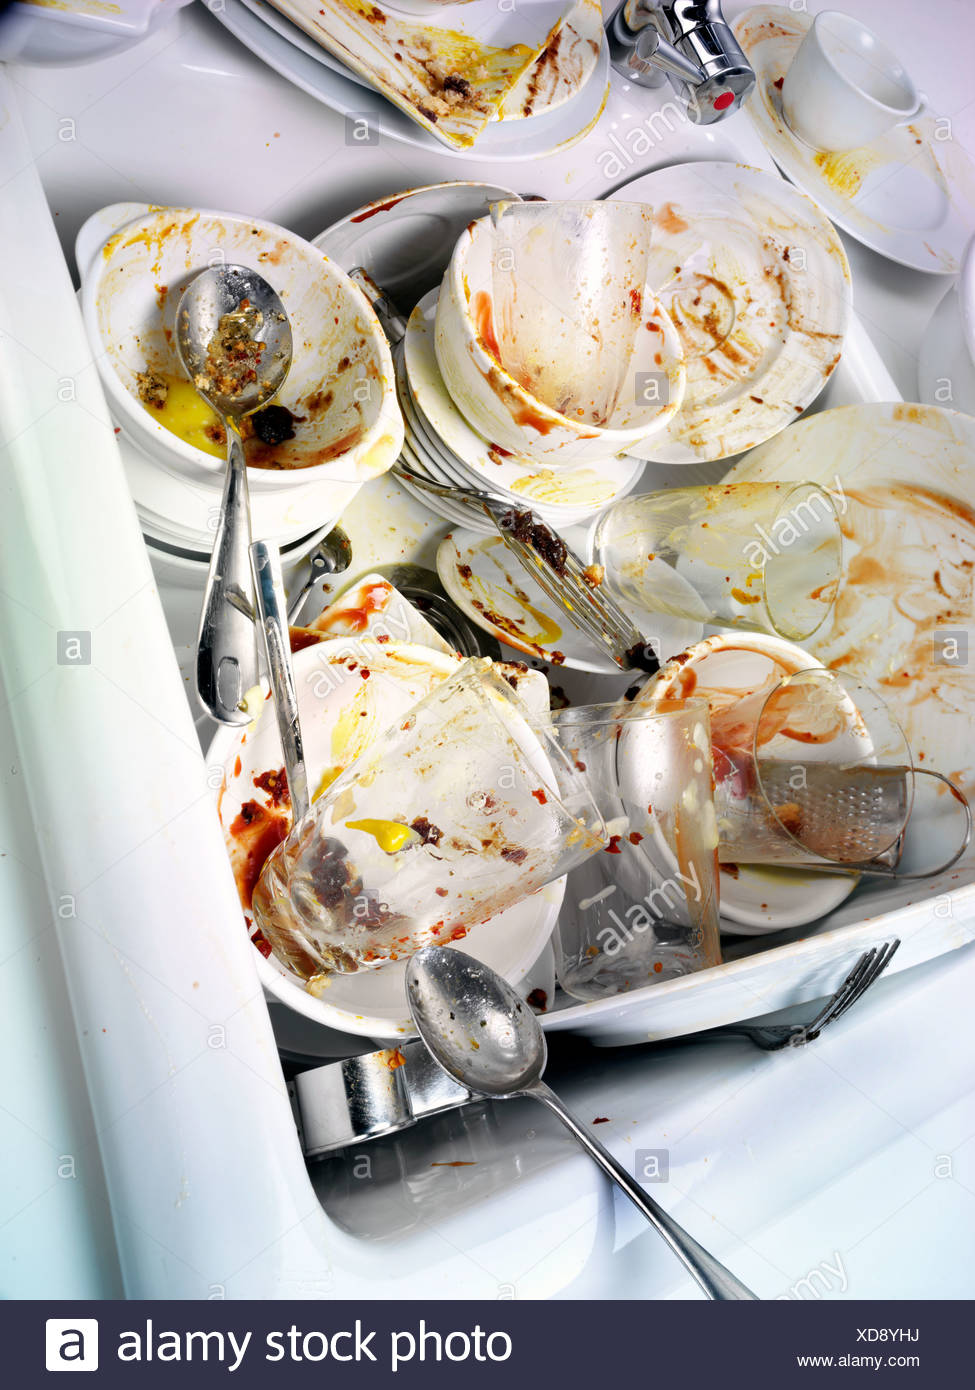 DIRTY DISHES IN SINK Stock Photo: 283553694 - Alamy